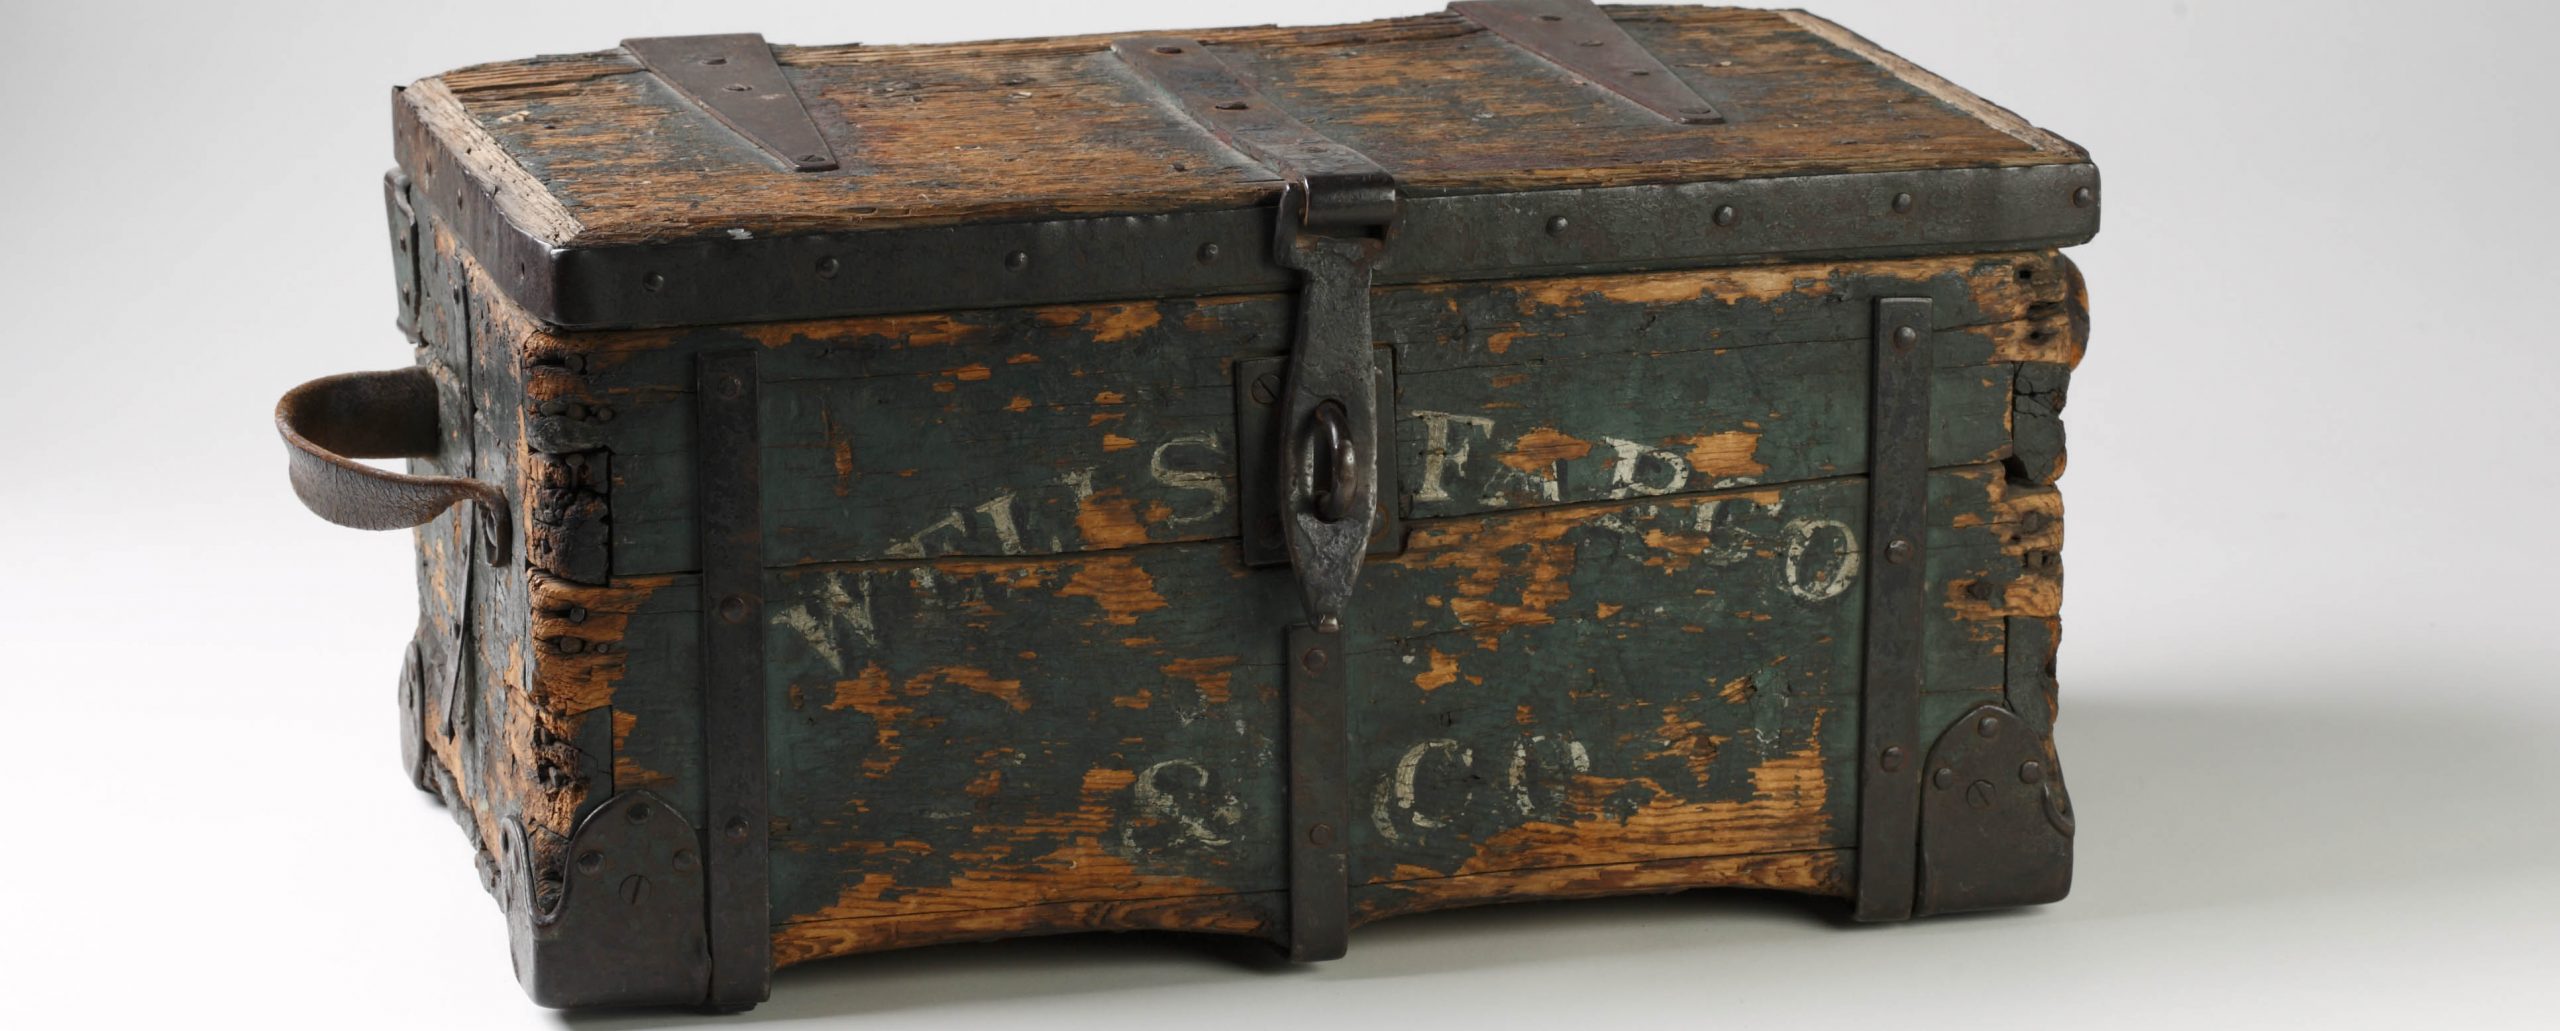 A rectangular wood box with a leather strap handle on left and Wells Fargo & Co on the front. Years of use have stripped away the green paint, but some is still visible on front panel.